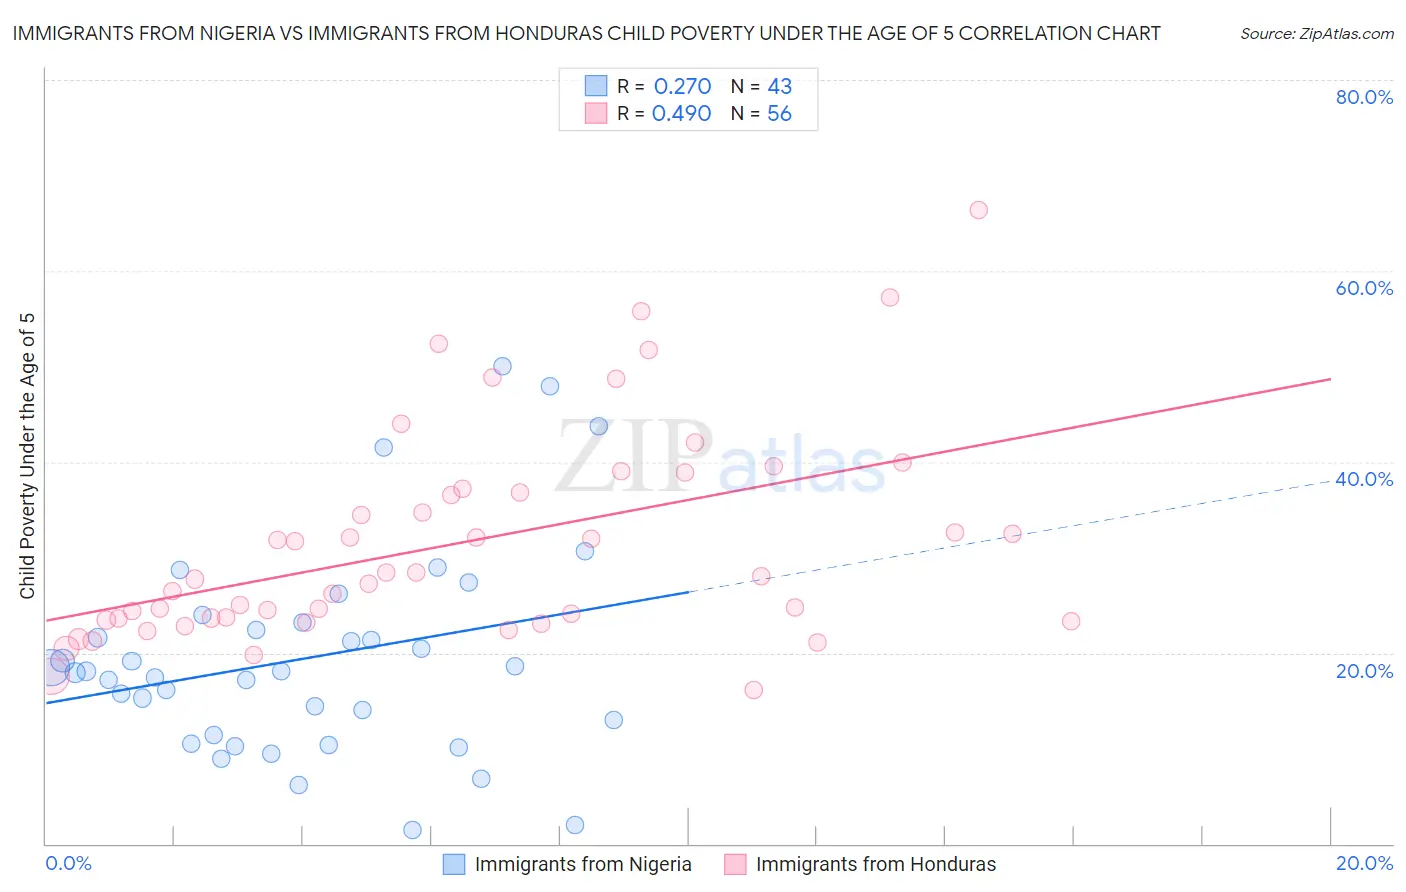 Immigrants from Nigeria vs Immigrants from Honduras Child Poverty Under the Age of 5